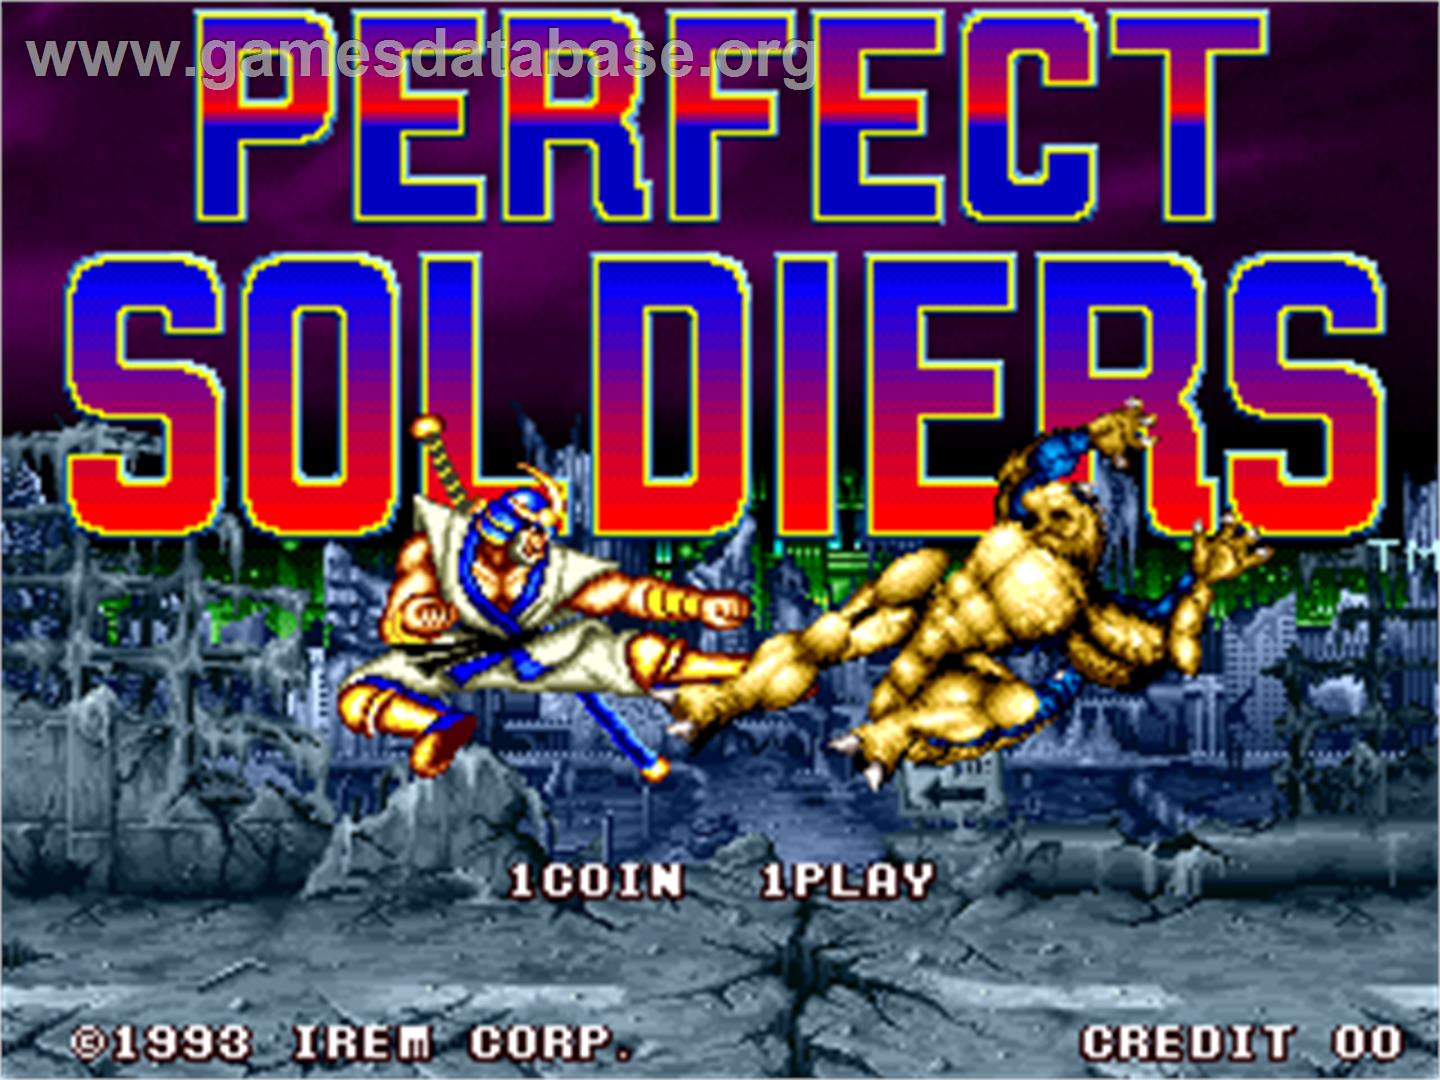 Perfect Soldiers - Arcade - Artwork - Title Screen